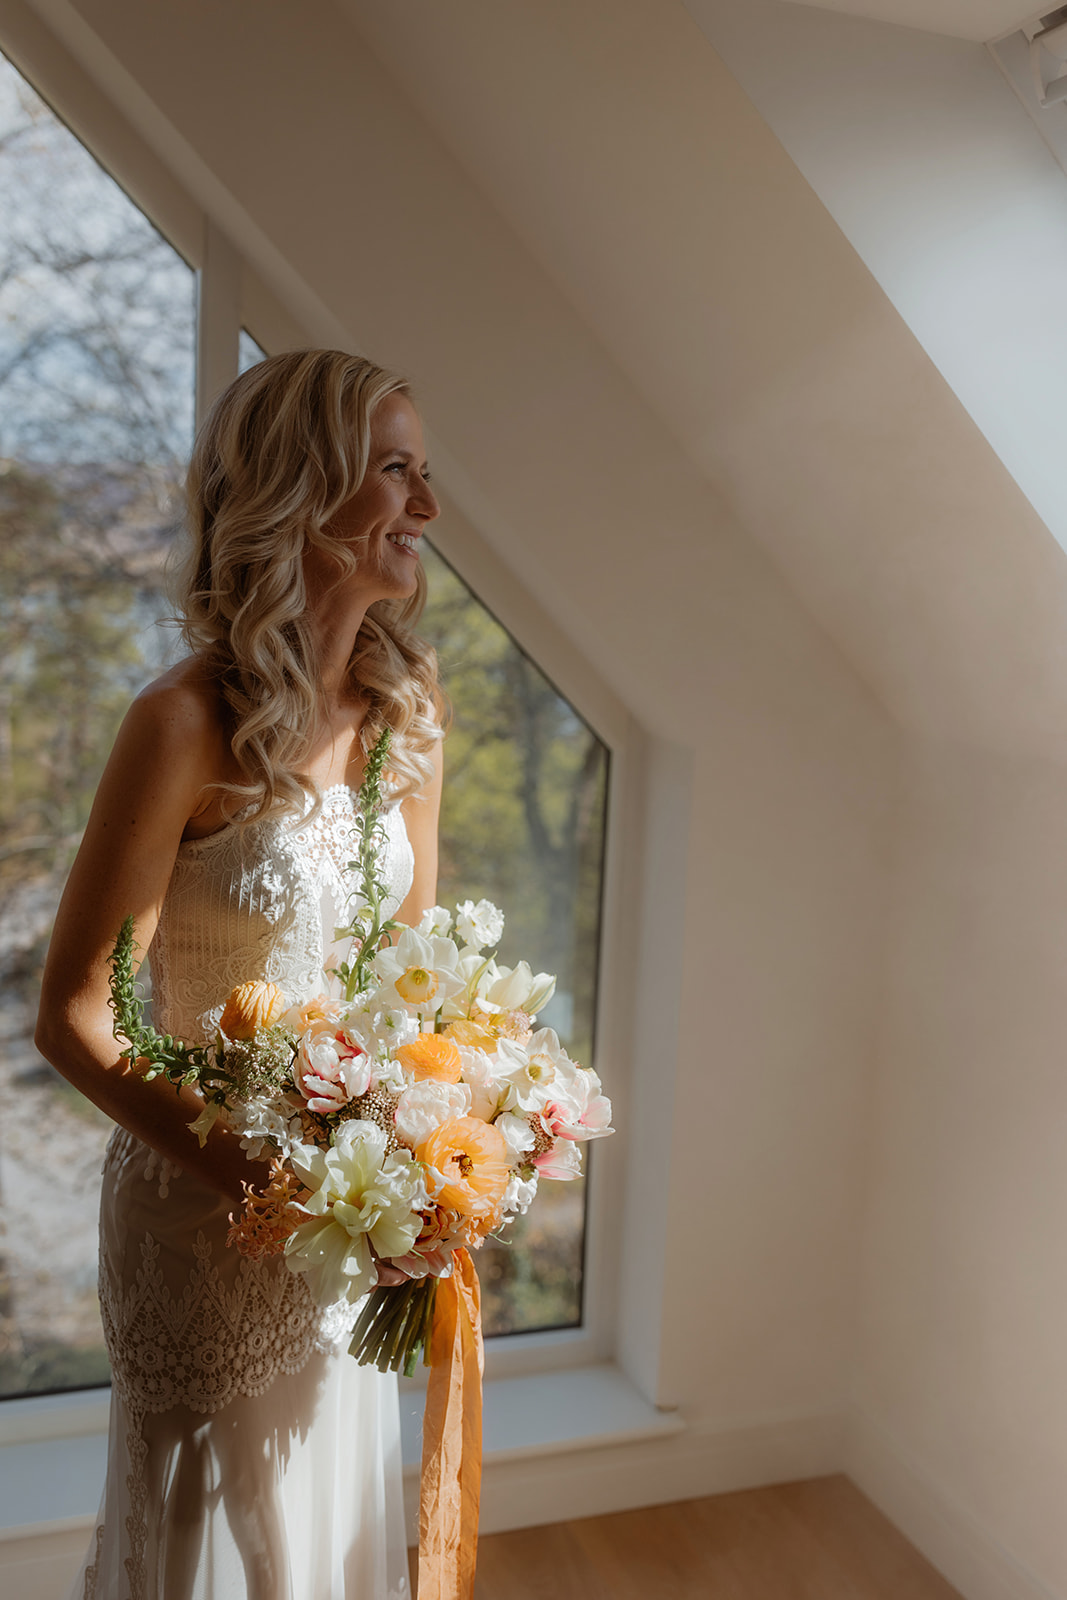 Kara wearing her gorgeous bridal gown while holding her bouquet for her Isle of Skye elopement